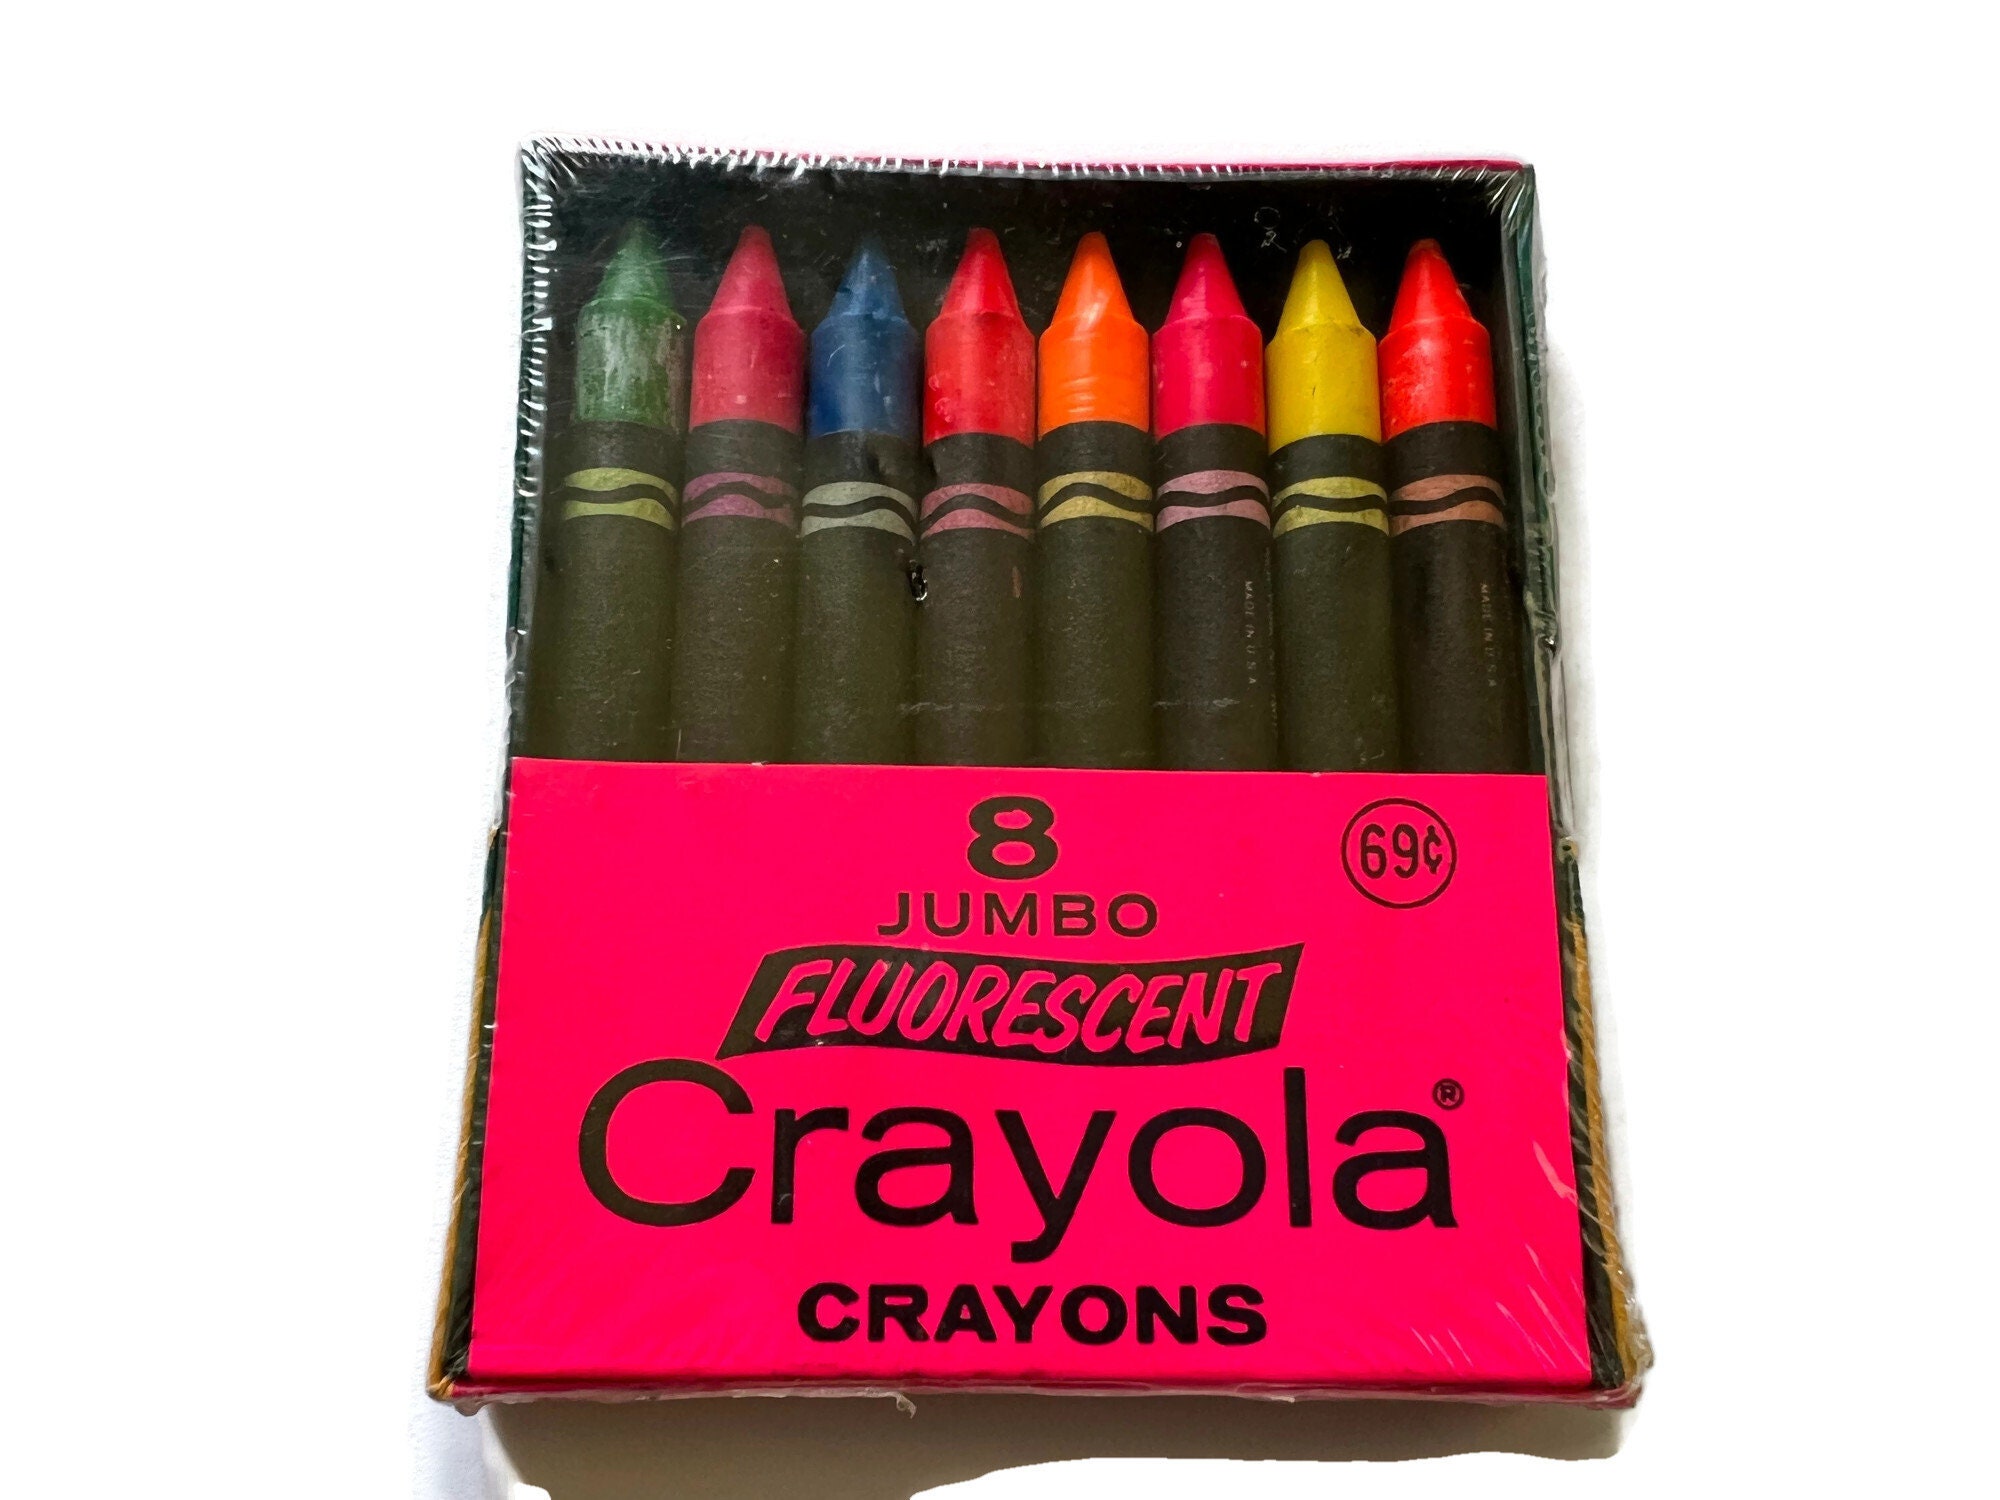 1970's Vintage Crayola Jumbo Fluorescent Crayons New in Box Never Opened 